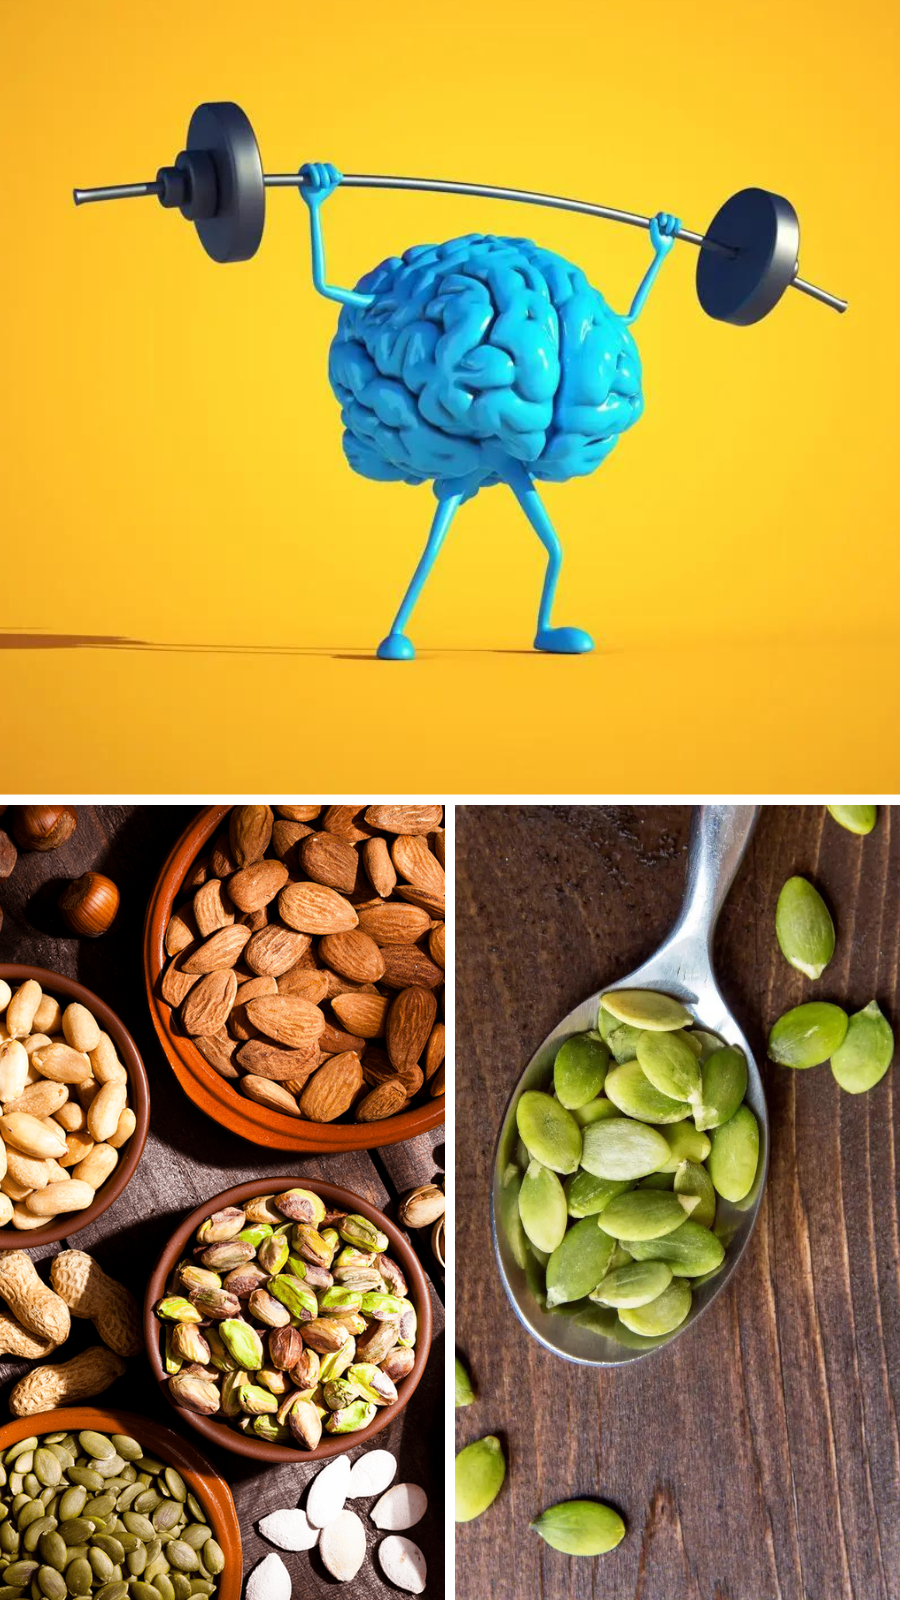 8 Foods To Boost Your Brain Power and Memory